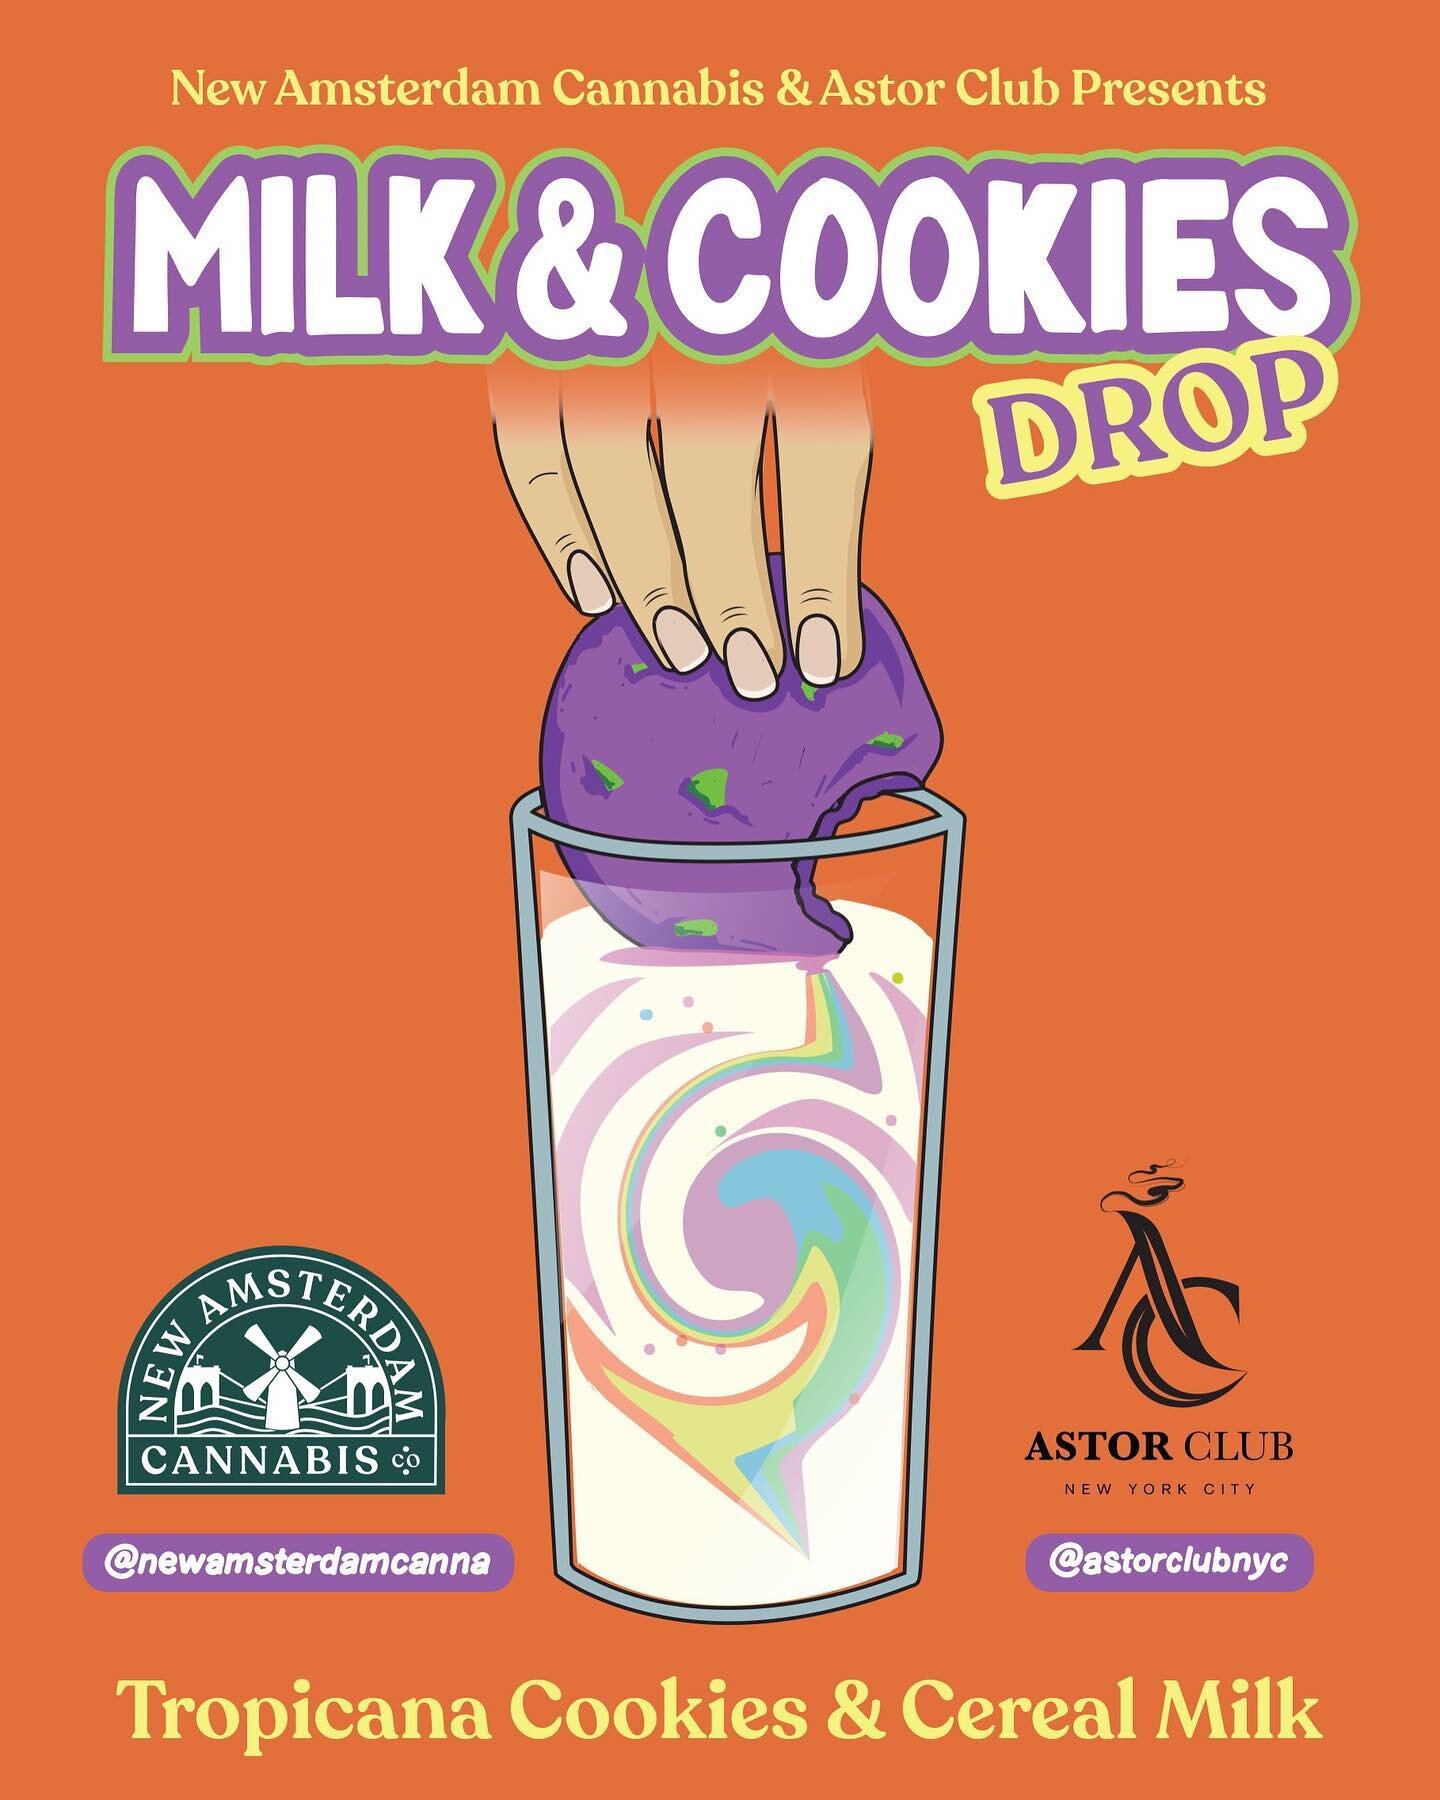 FRIDAY 9/9 6-10PM 
Be the first to get a hold of our latest batch of Cereal Milk and Tropicana Cookies at @astorclubnyc